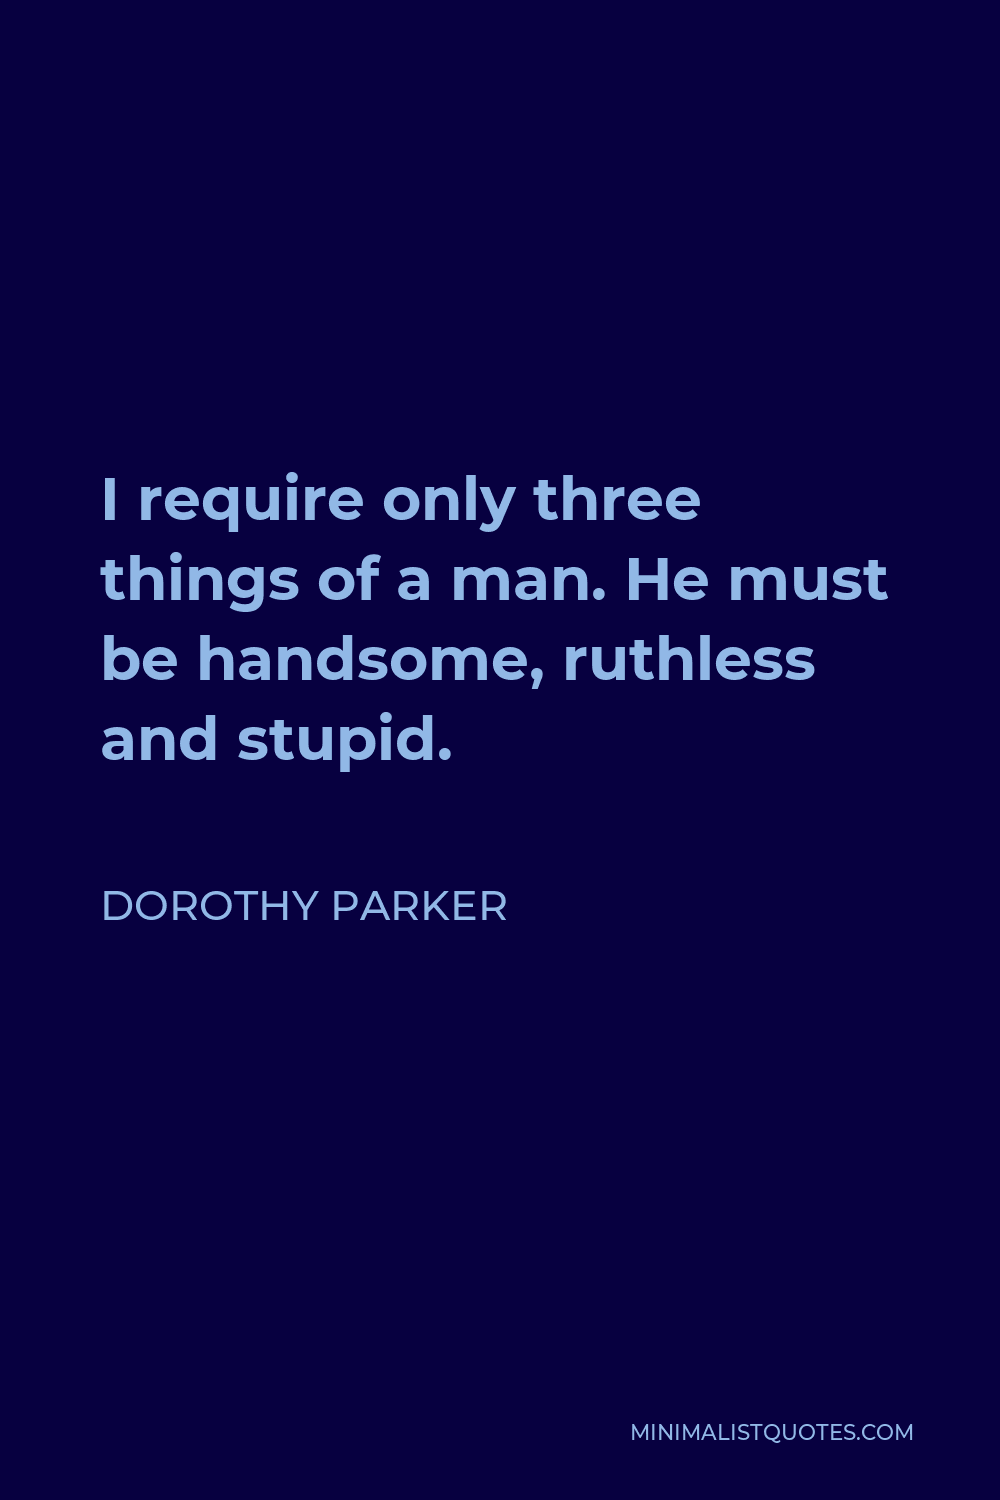 Dorothy Parker Quote - I require only three things of a man. He must be handsome, ruthless and stupid.